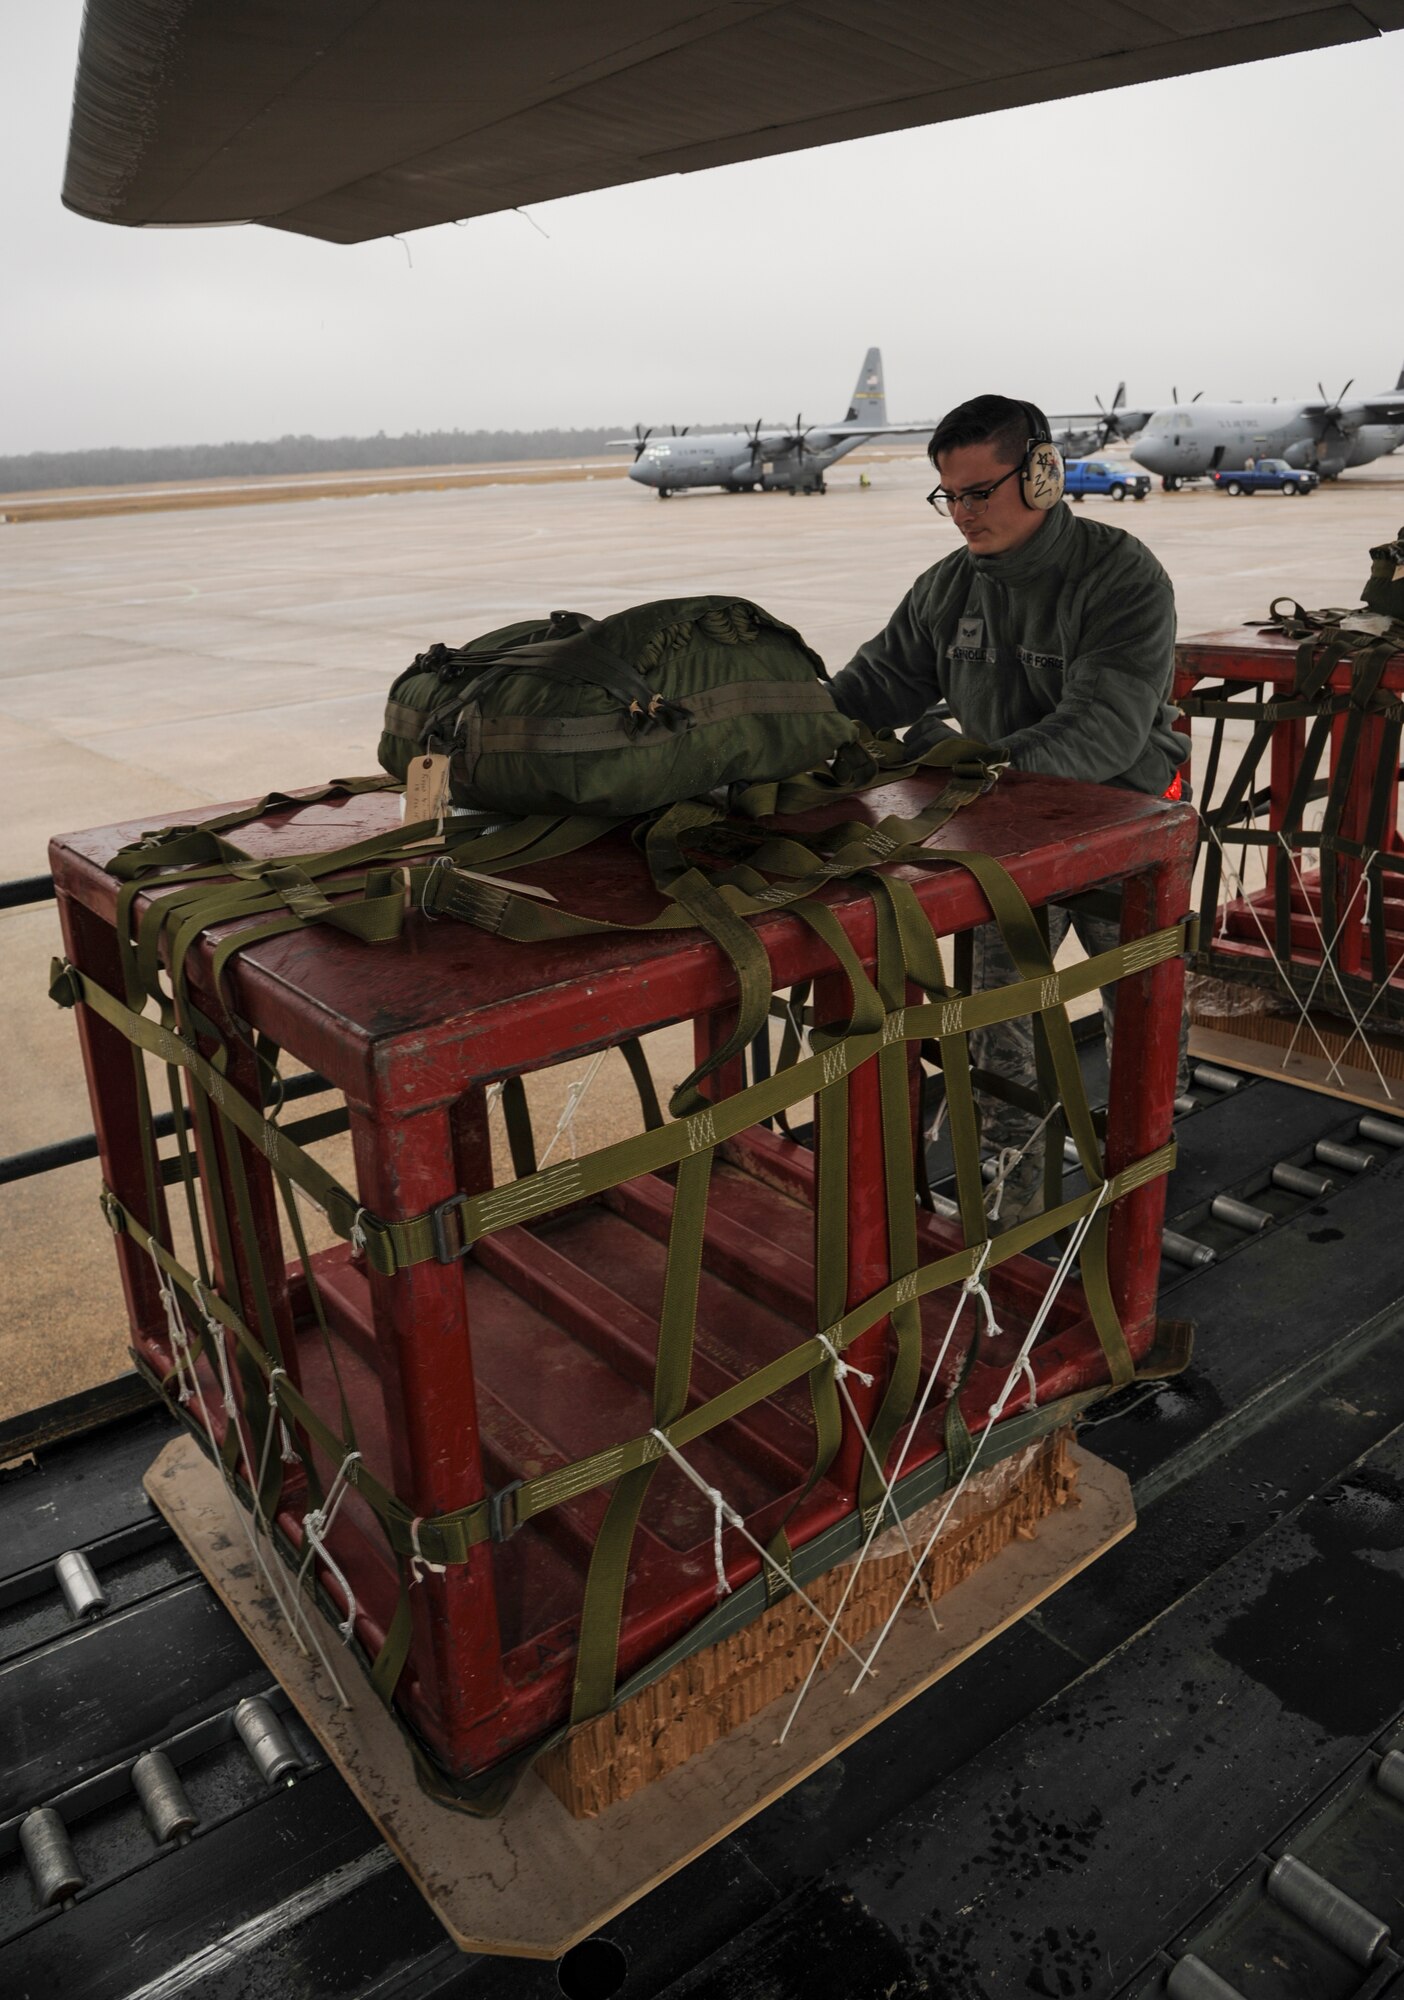 Senior Airman Zachary Arnold, a 19th Logistics Readiness Squadron air transportation specialist, loads a container deliver system onto a C-130J March 9, 2015, at Little Rock Air Force Base, Ark. The cargo pallet was dropped as part of a local aerial delivery exercise. (U.S. Air Force photo by Airman 1st Class Harry Brexel)  